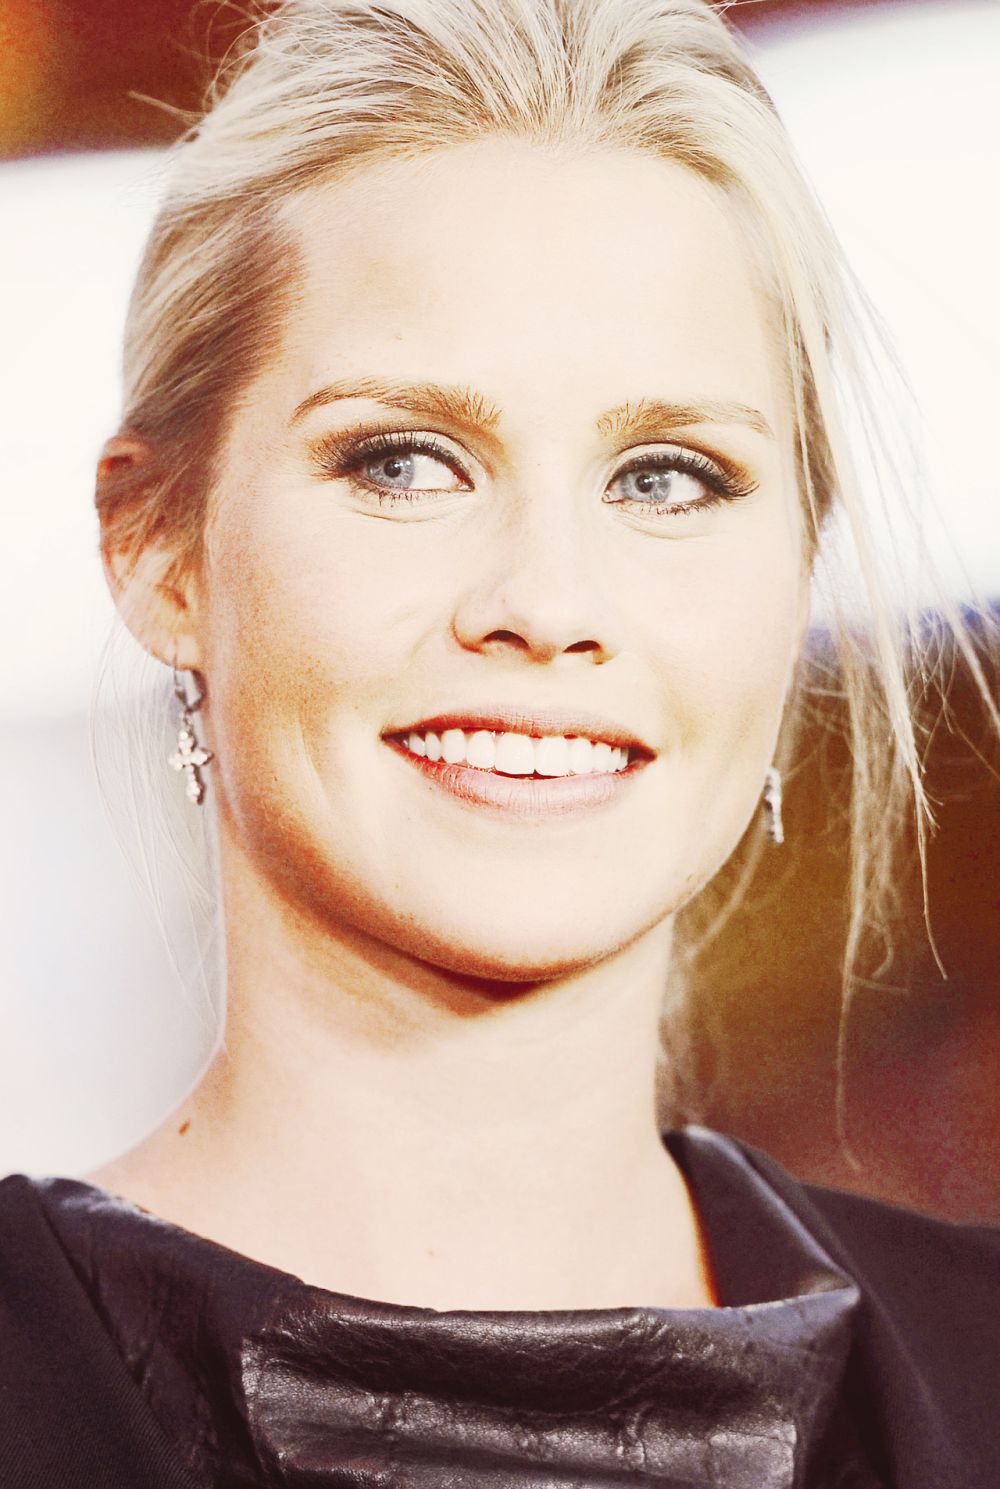 Claire Holt Sexy and Hottest Photos , Latest Pics